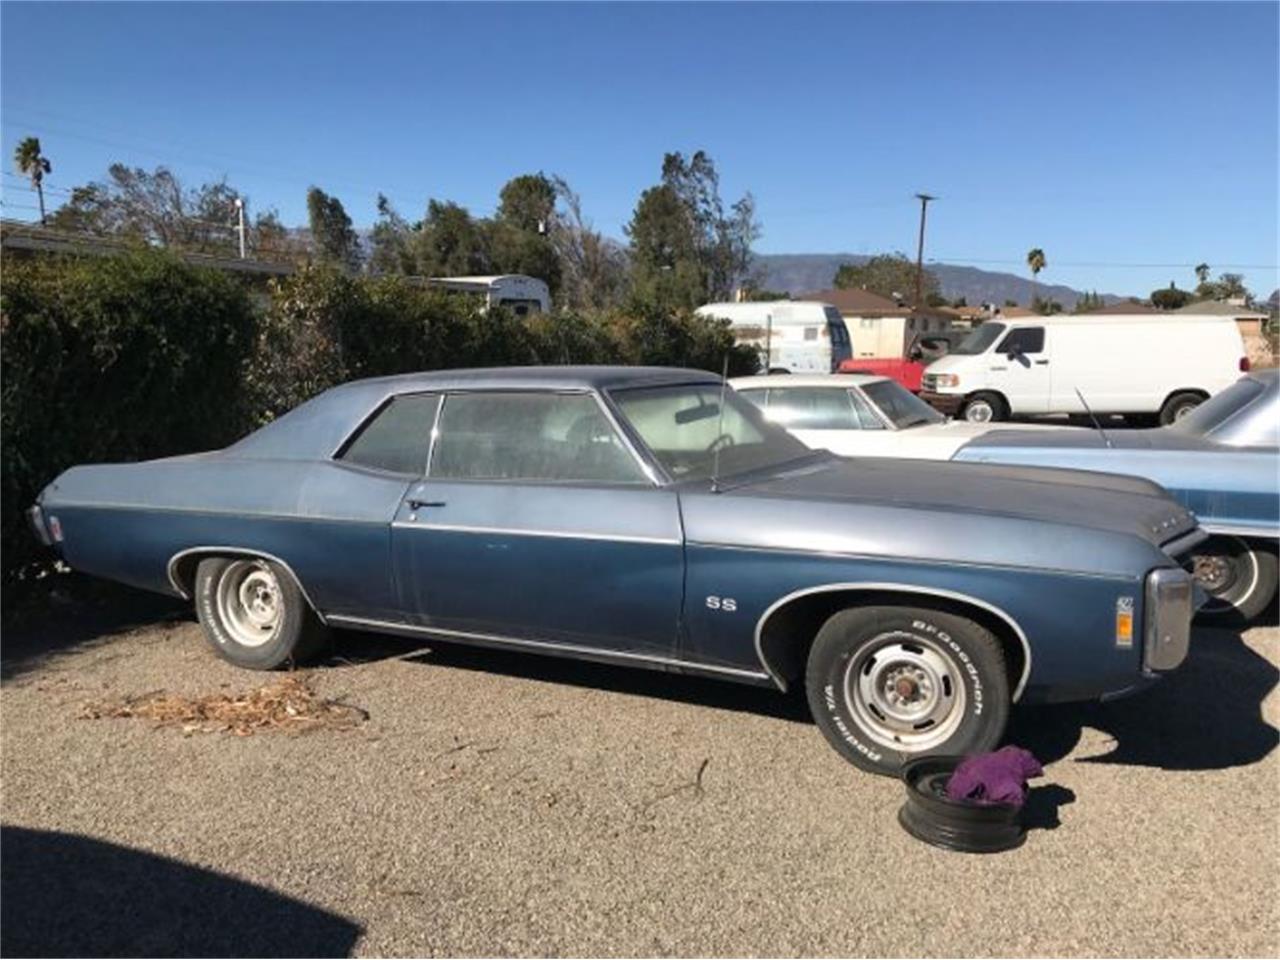 Pick of the Day: 1969 Chevrolet Impala SS 427